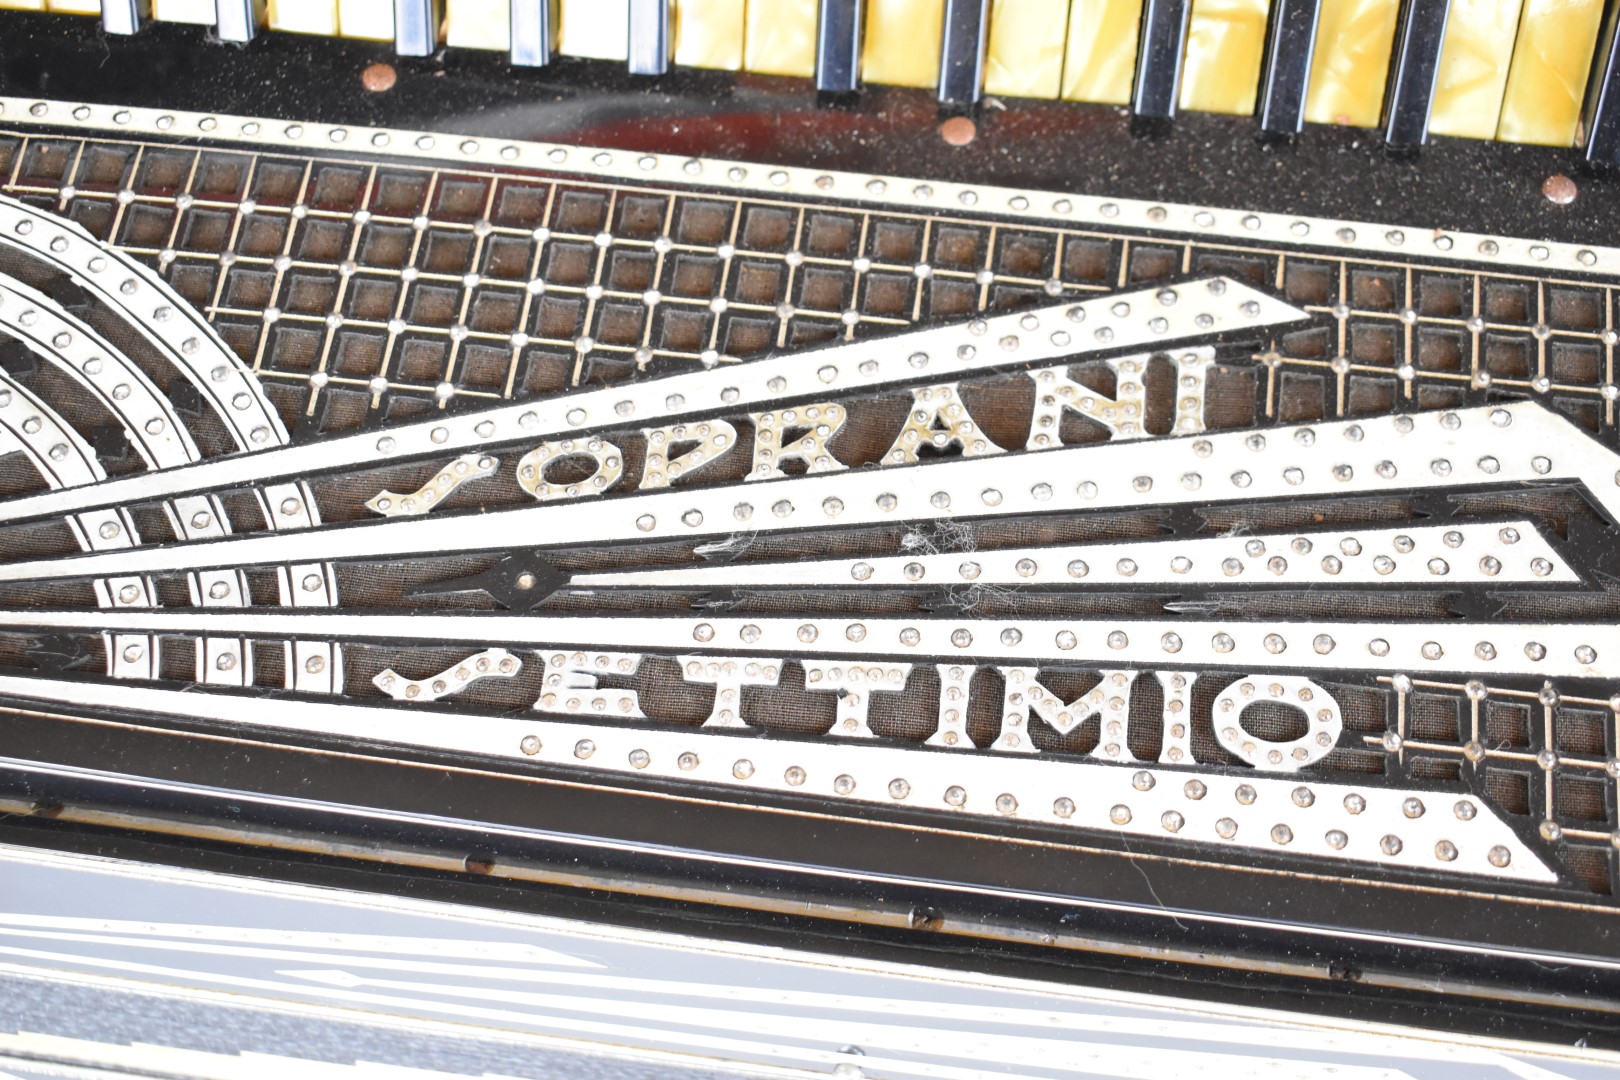 Soprani Settimio 41 key piano accordion in black/gem finish, with fitted hard case. - Image 4 of 7